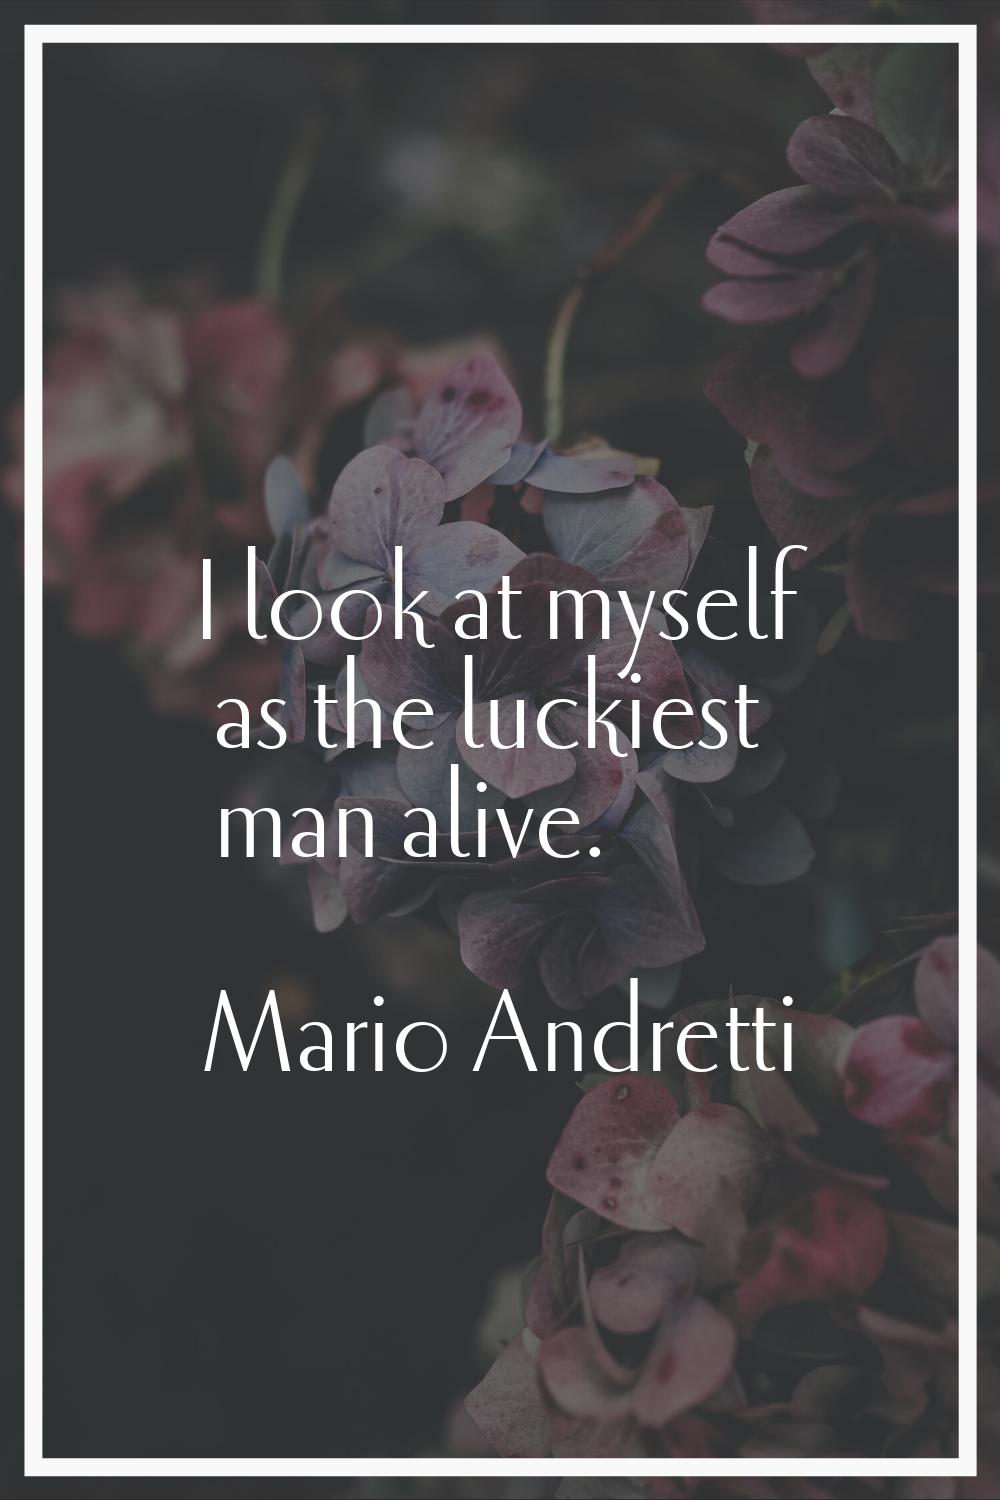 I look at myself as the luckiest man alive.